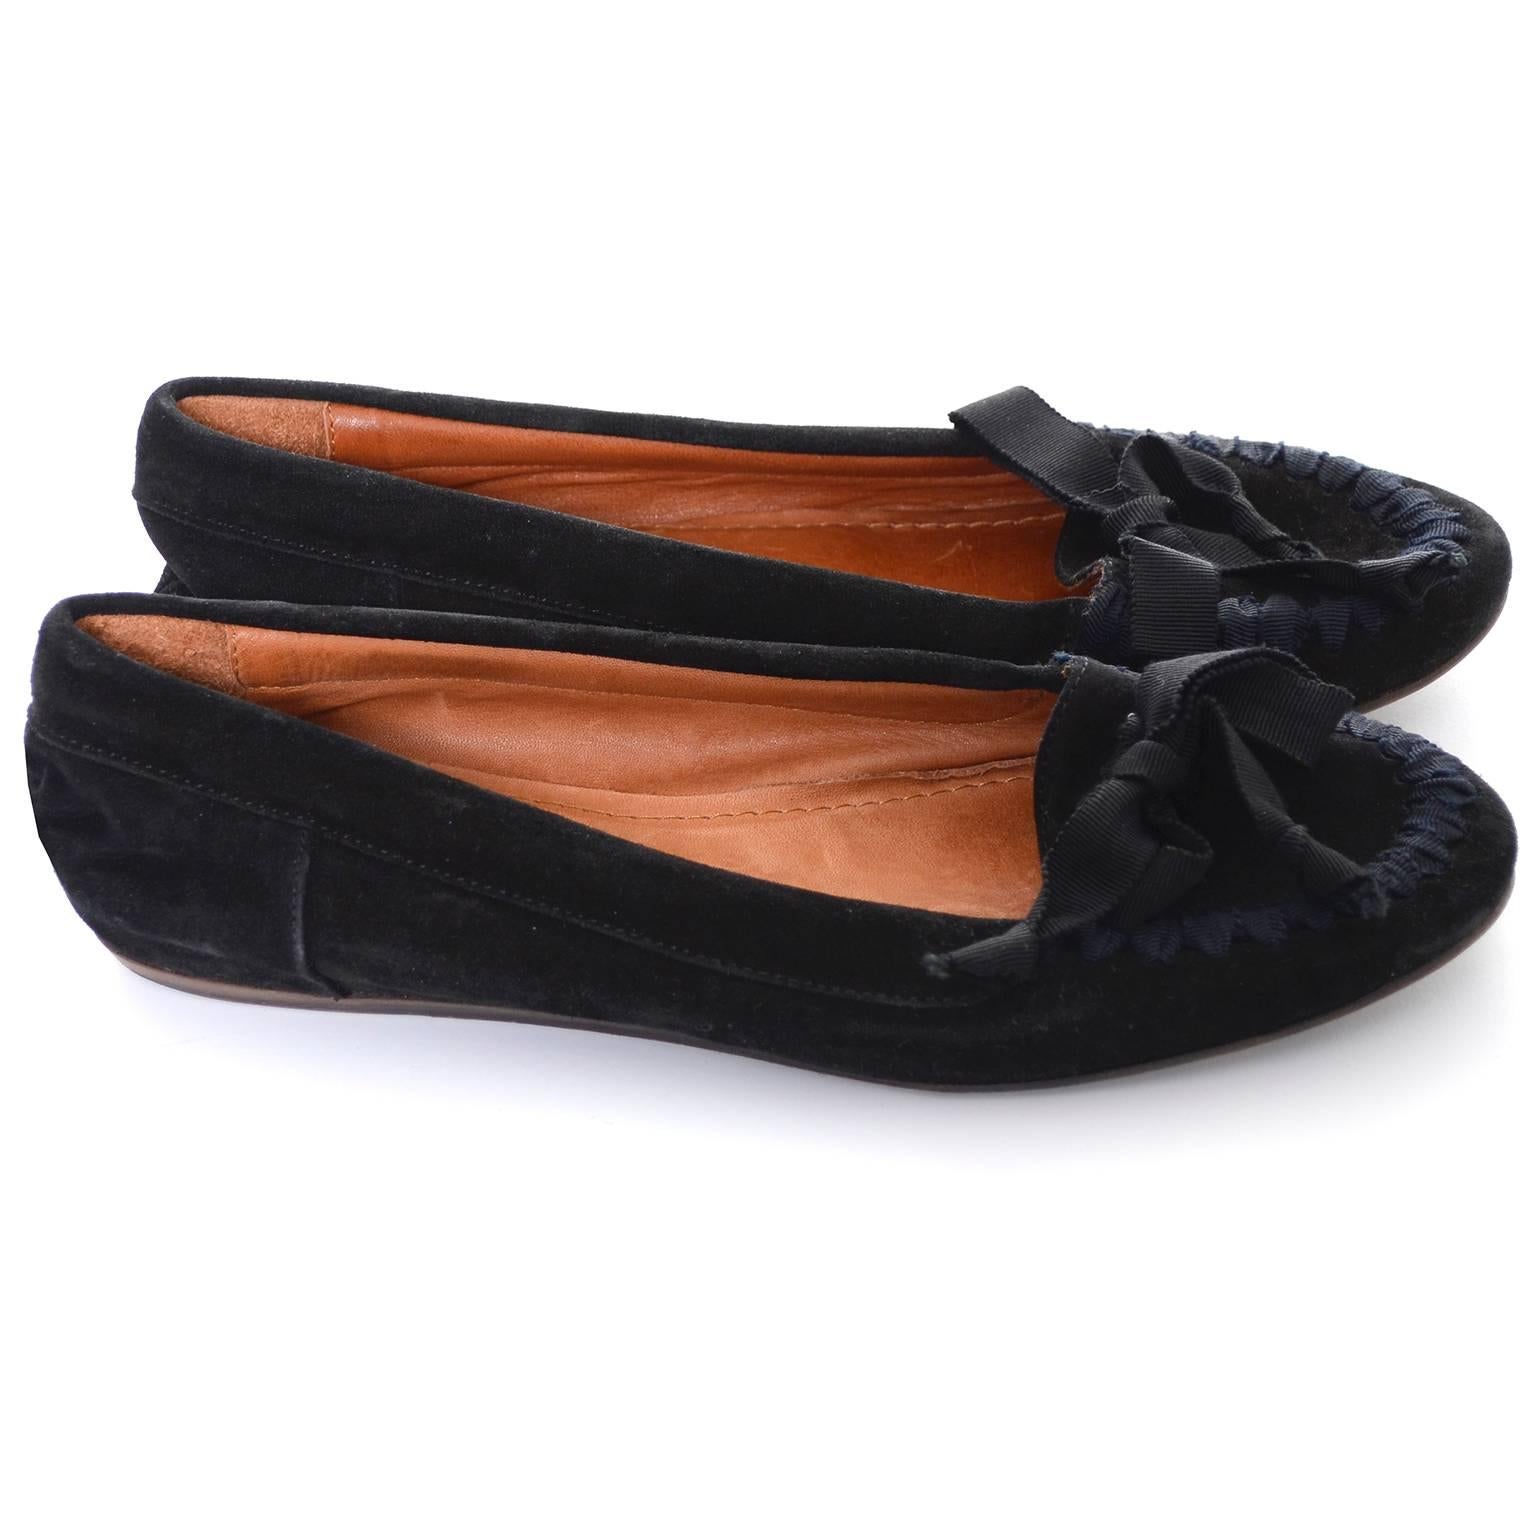 Pretty Lanvin Paris black flat loafers with grosgrain ribbons and bows.  These black suede shoes are labeled a French size 38 with is a US size 6 and 1/2.  The shoes have minor sole scuffs but are otherwise in excellent condition. Made in France.